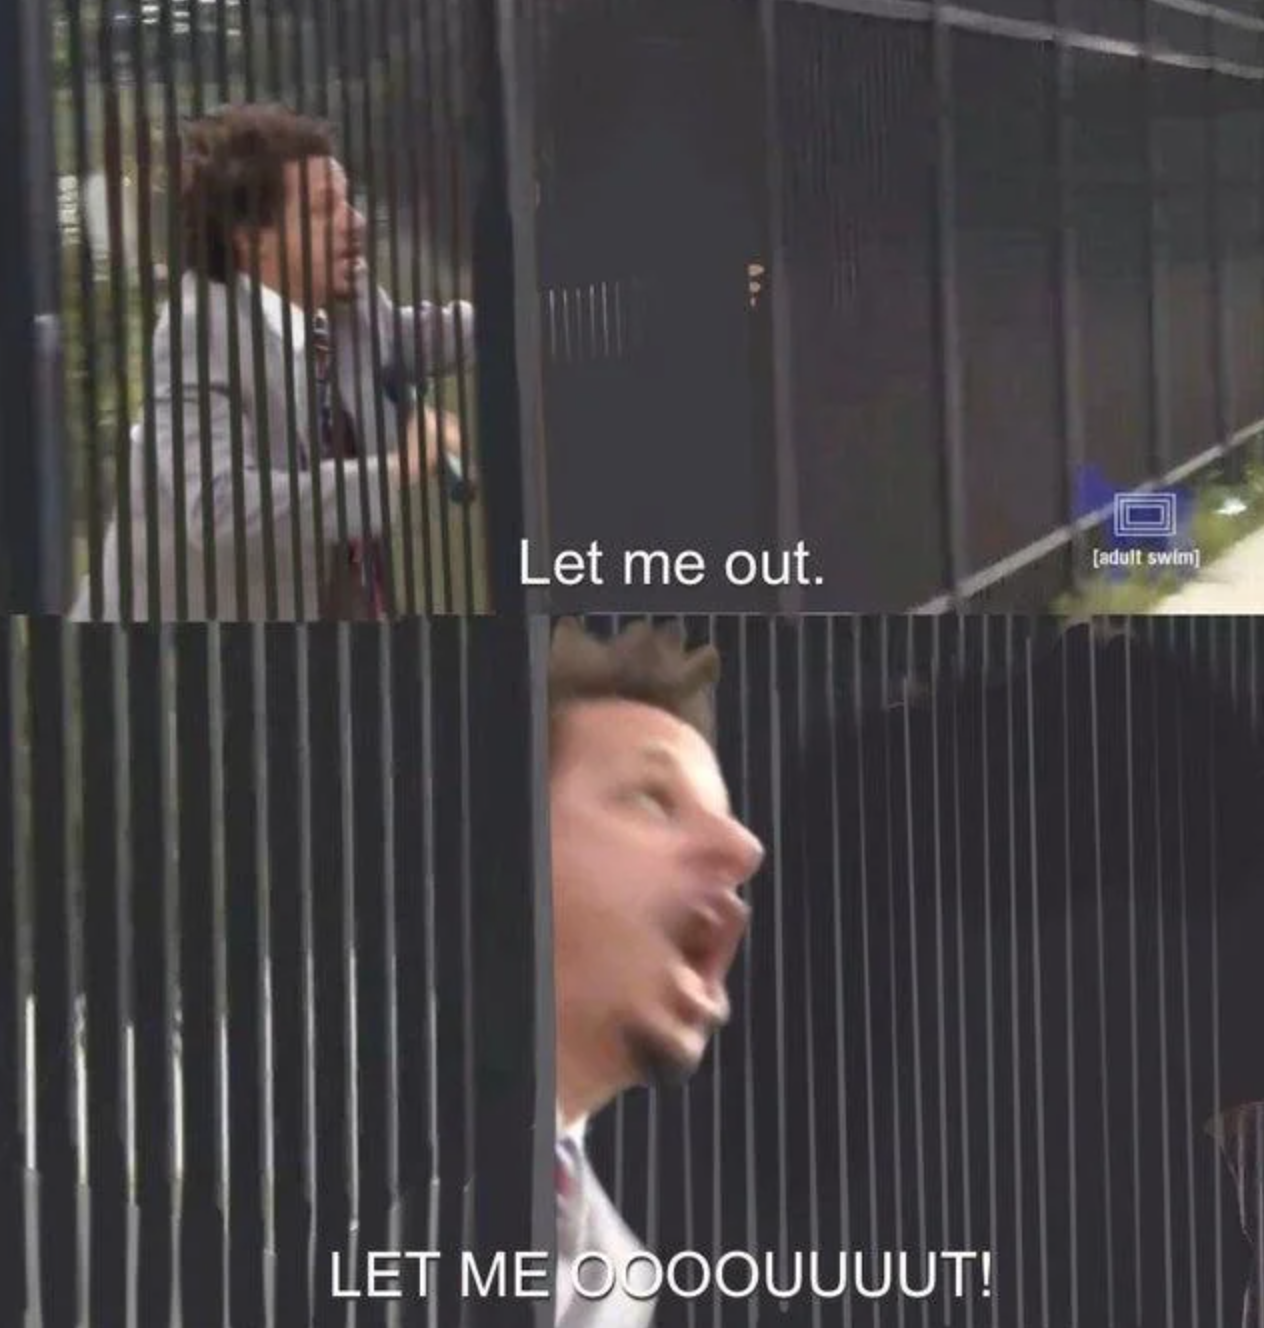 elden ring memes - let me out let me out - Let me out Indola Let Me Oooouuuut!